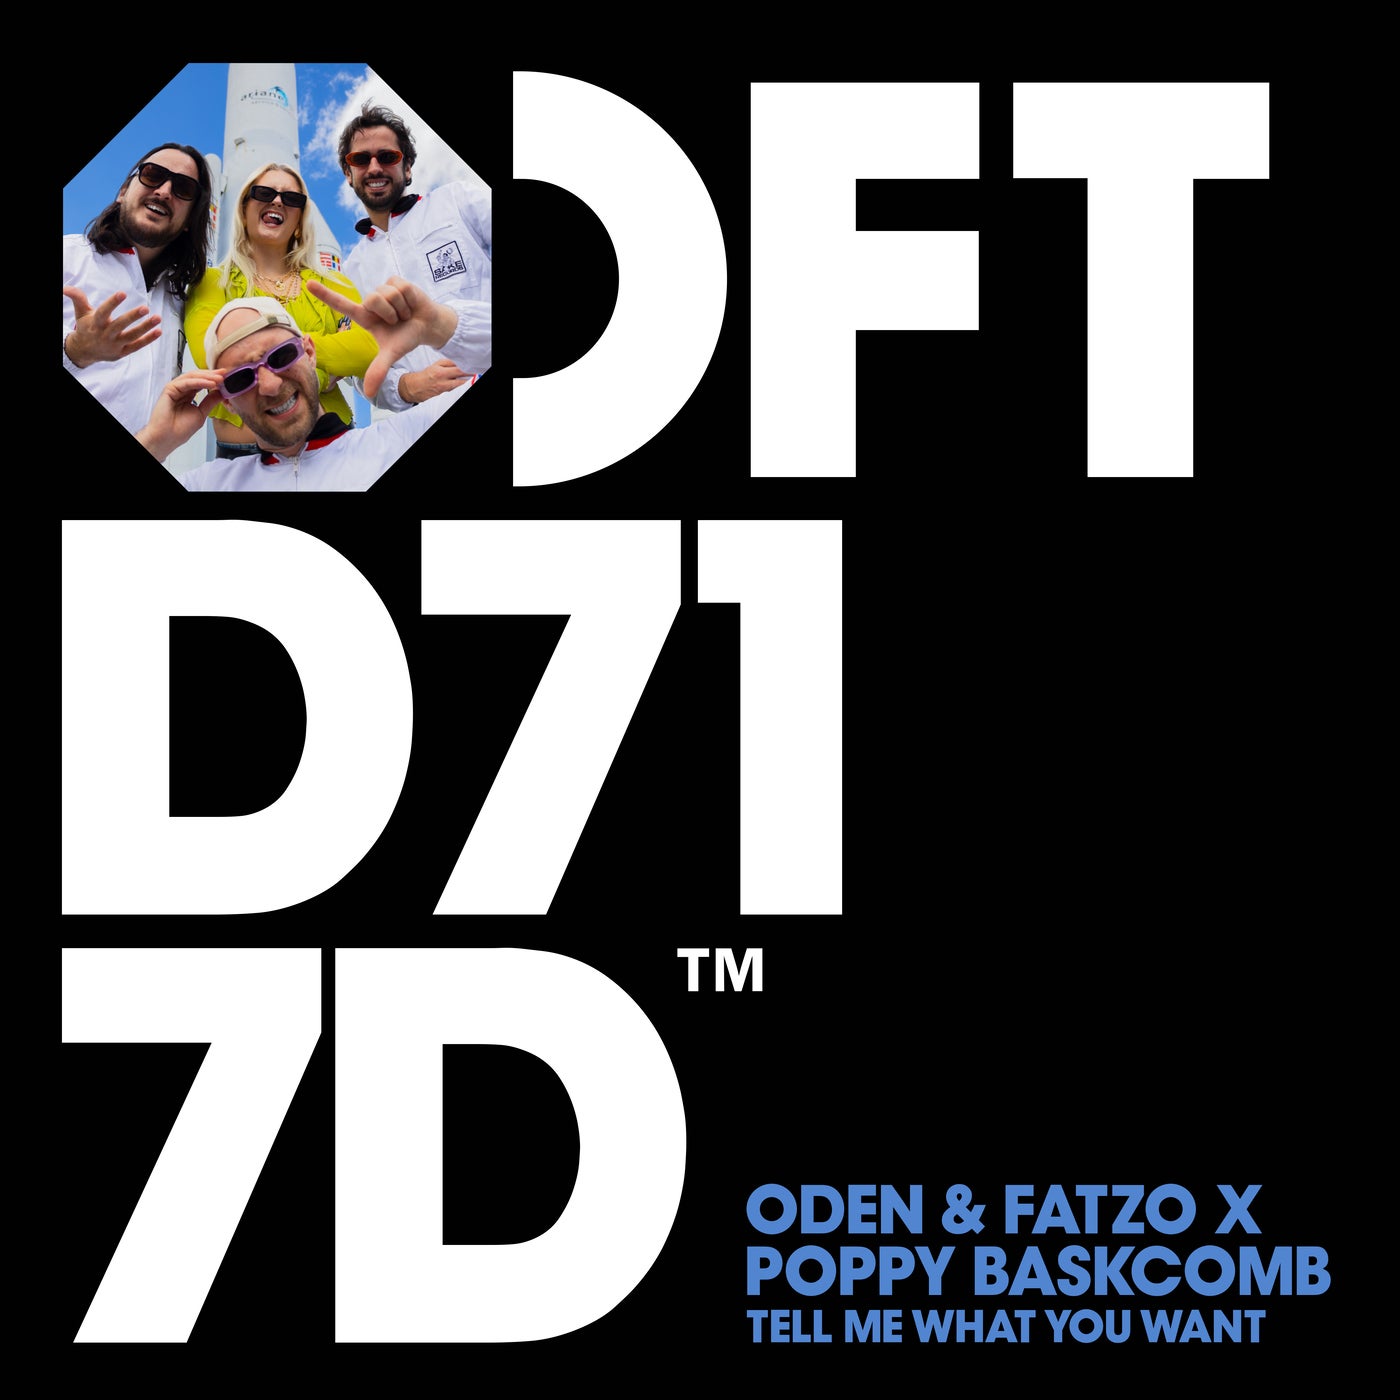 Oden & Fatzo, Poppy Baskcomb - Tell Me What You Want - Extended Mix on Defected